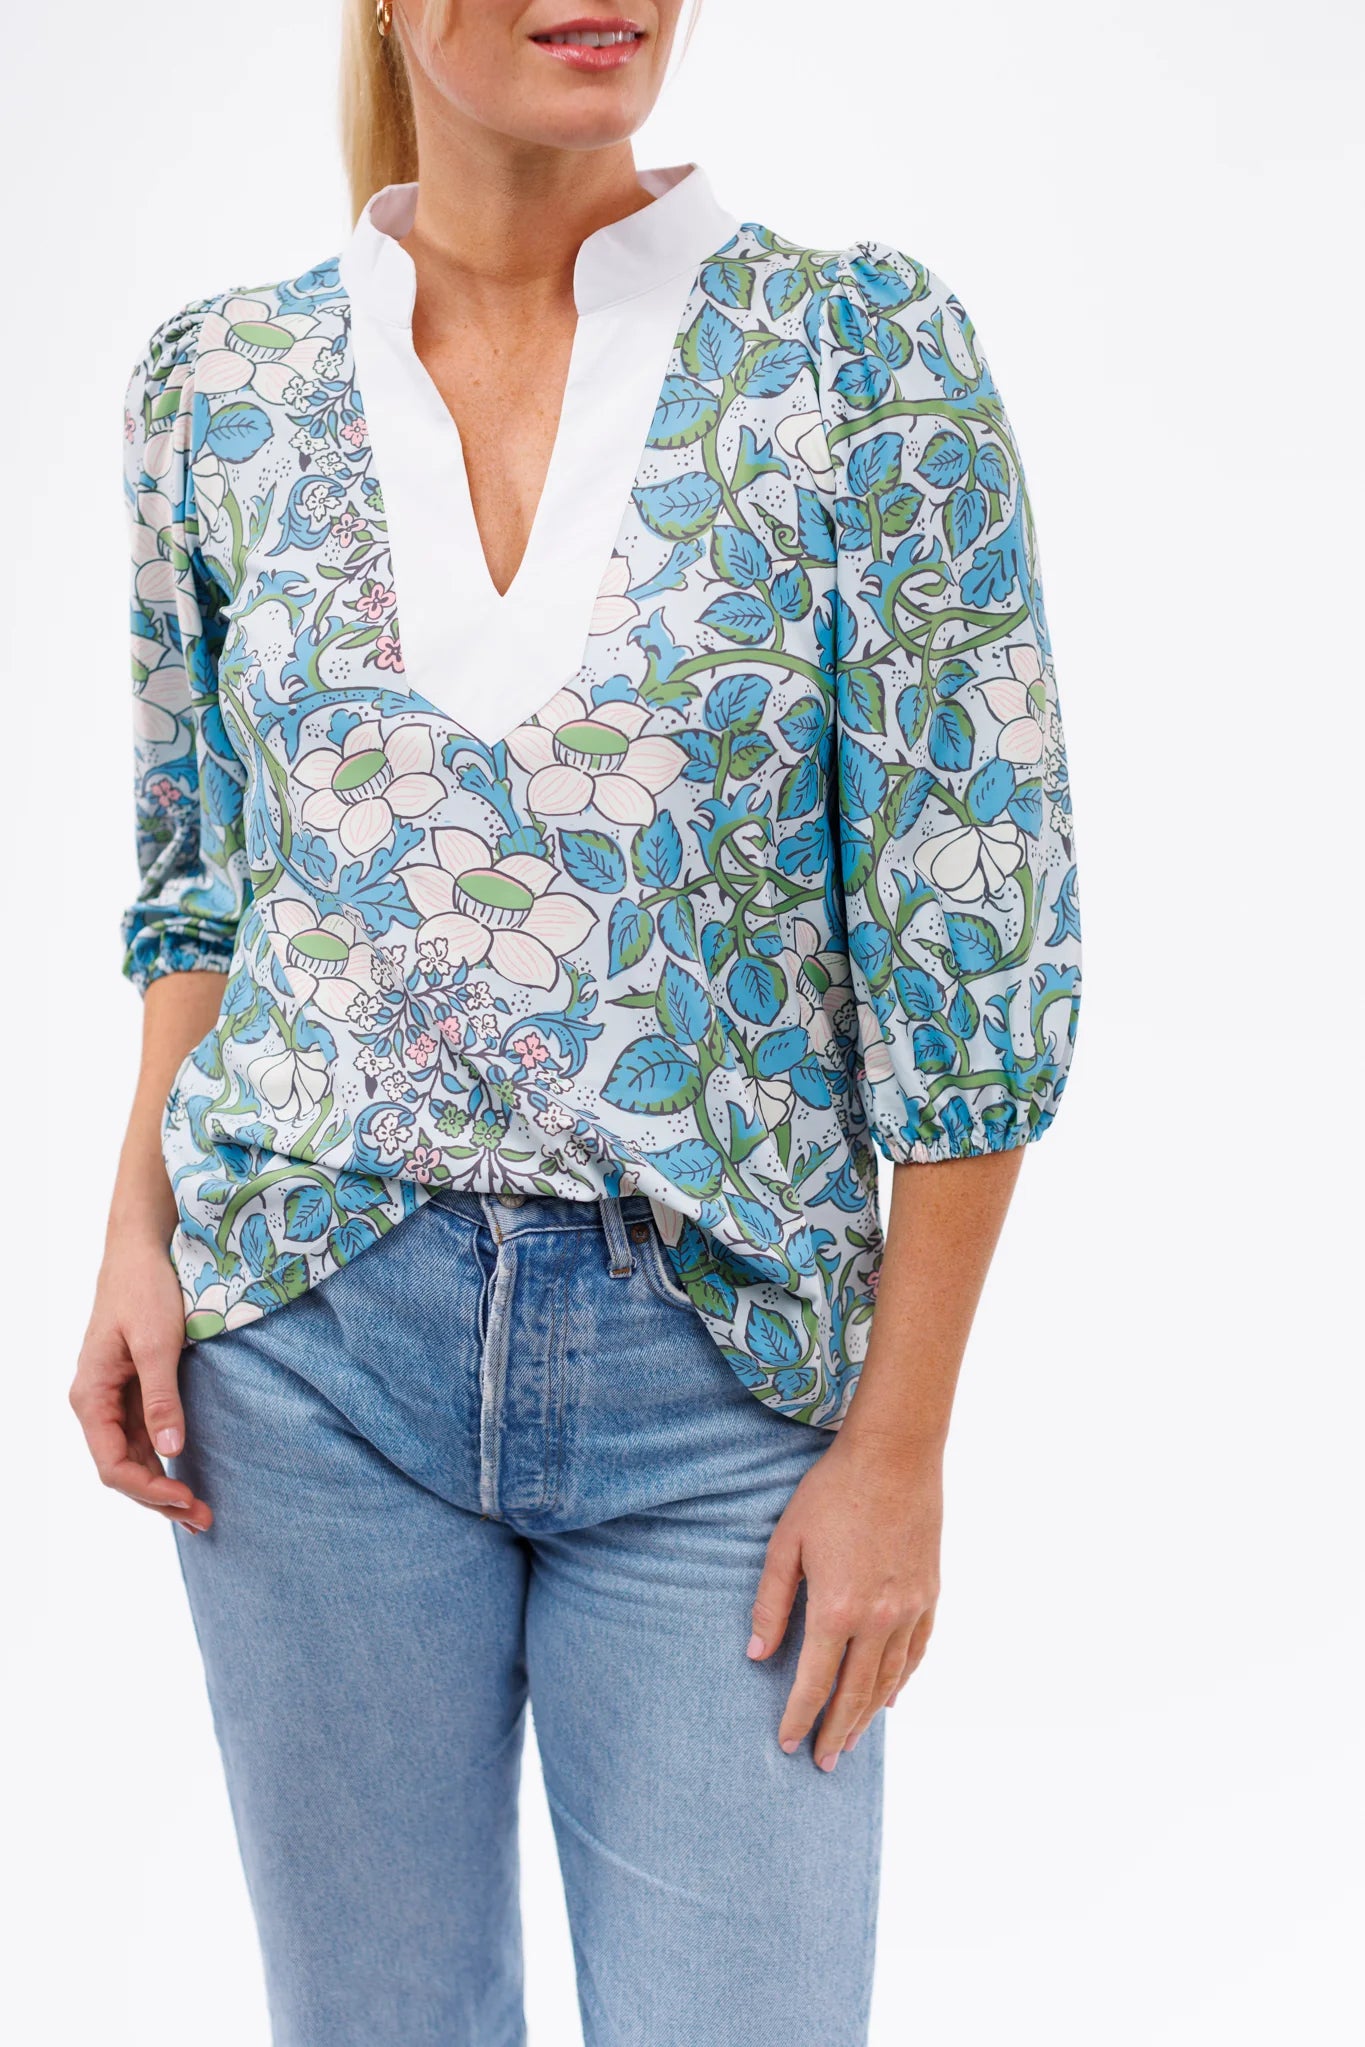 Smith & Quinn Eliza Top in French Lily